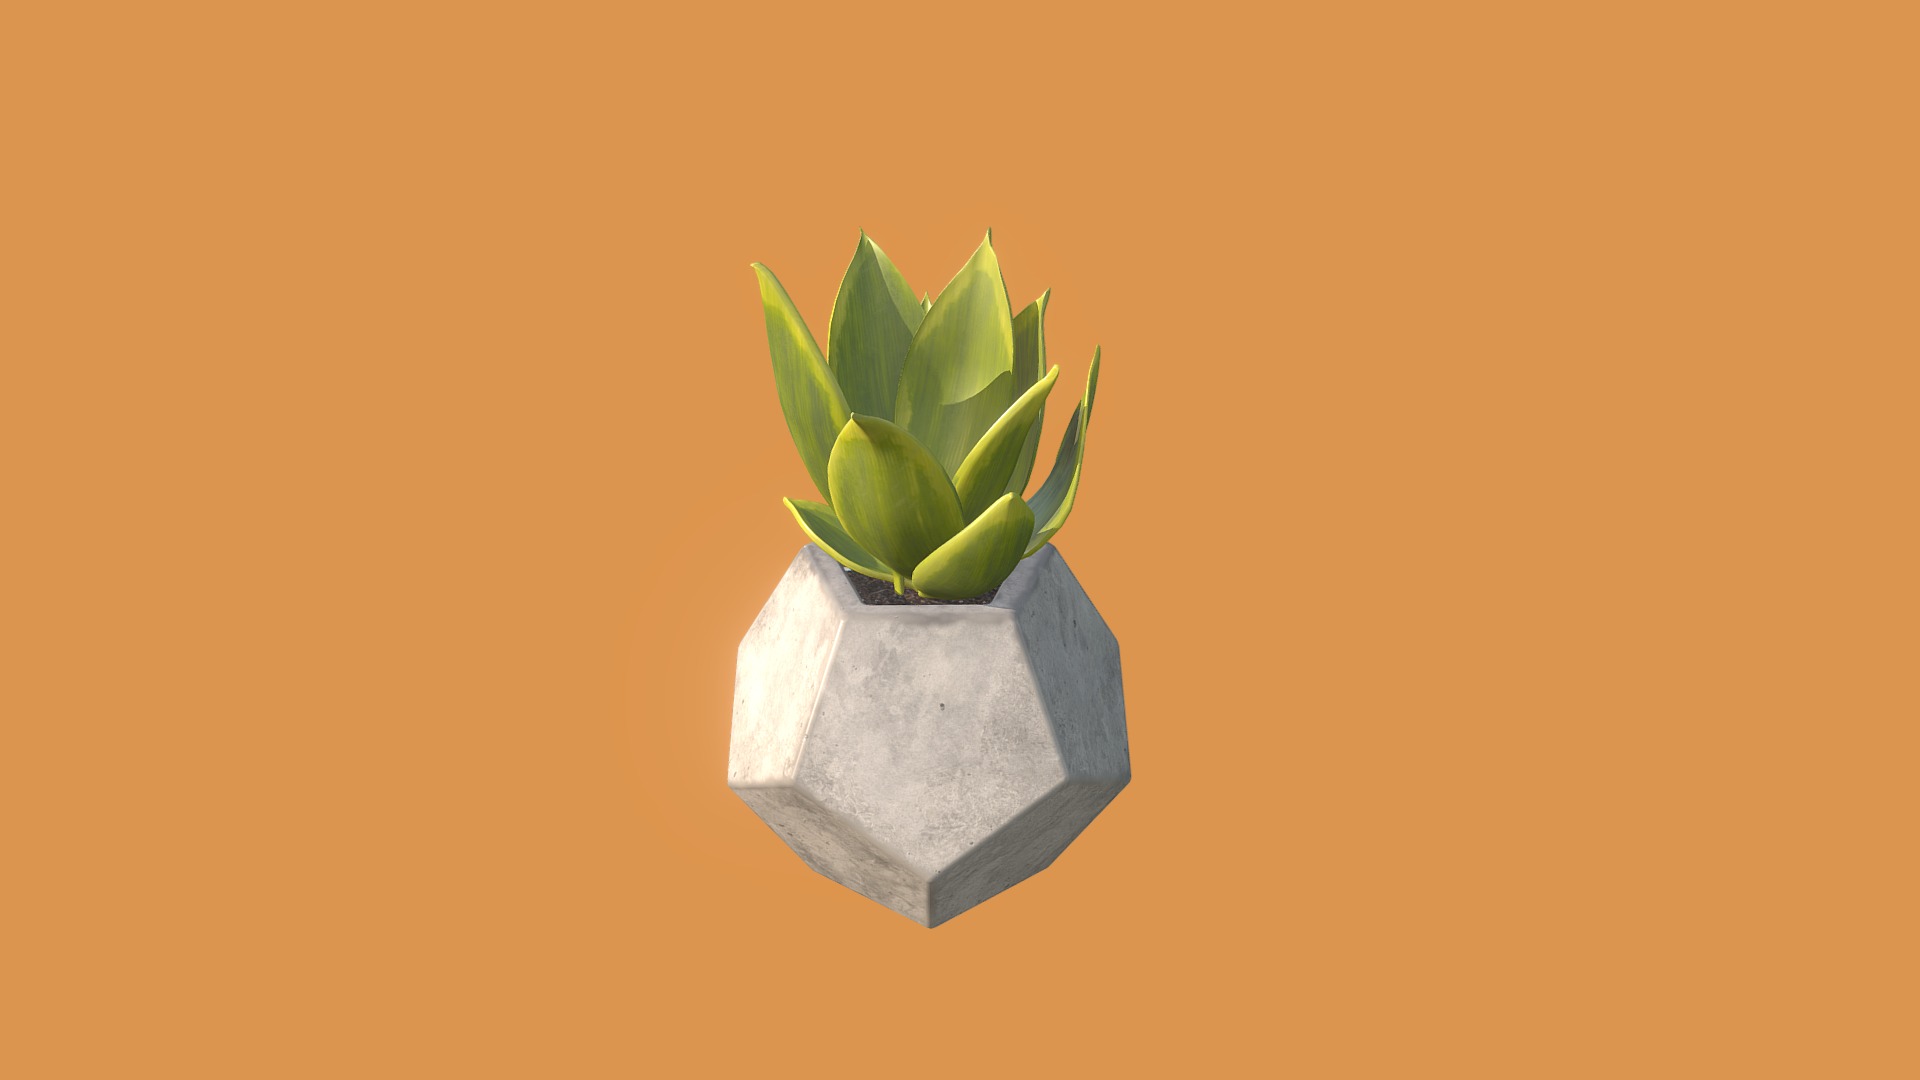 3D model Dodekaeder Cactus - This is a 3D model of the Dodekaeder Cactus. The 3D model is about a plant in a pot.